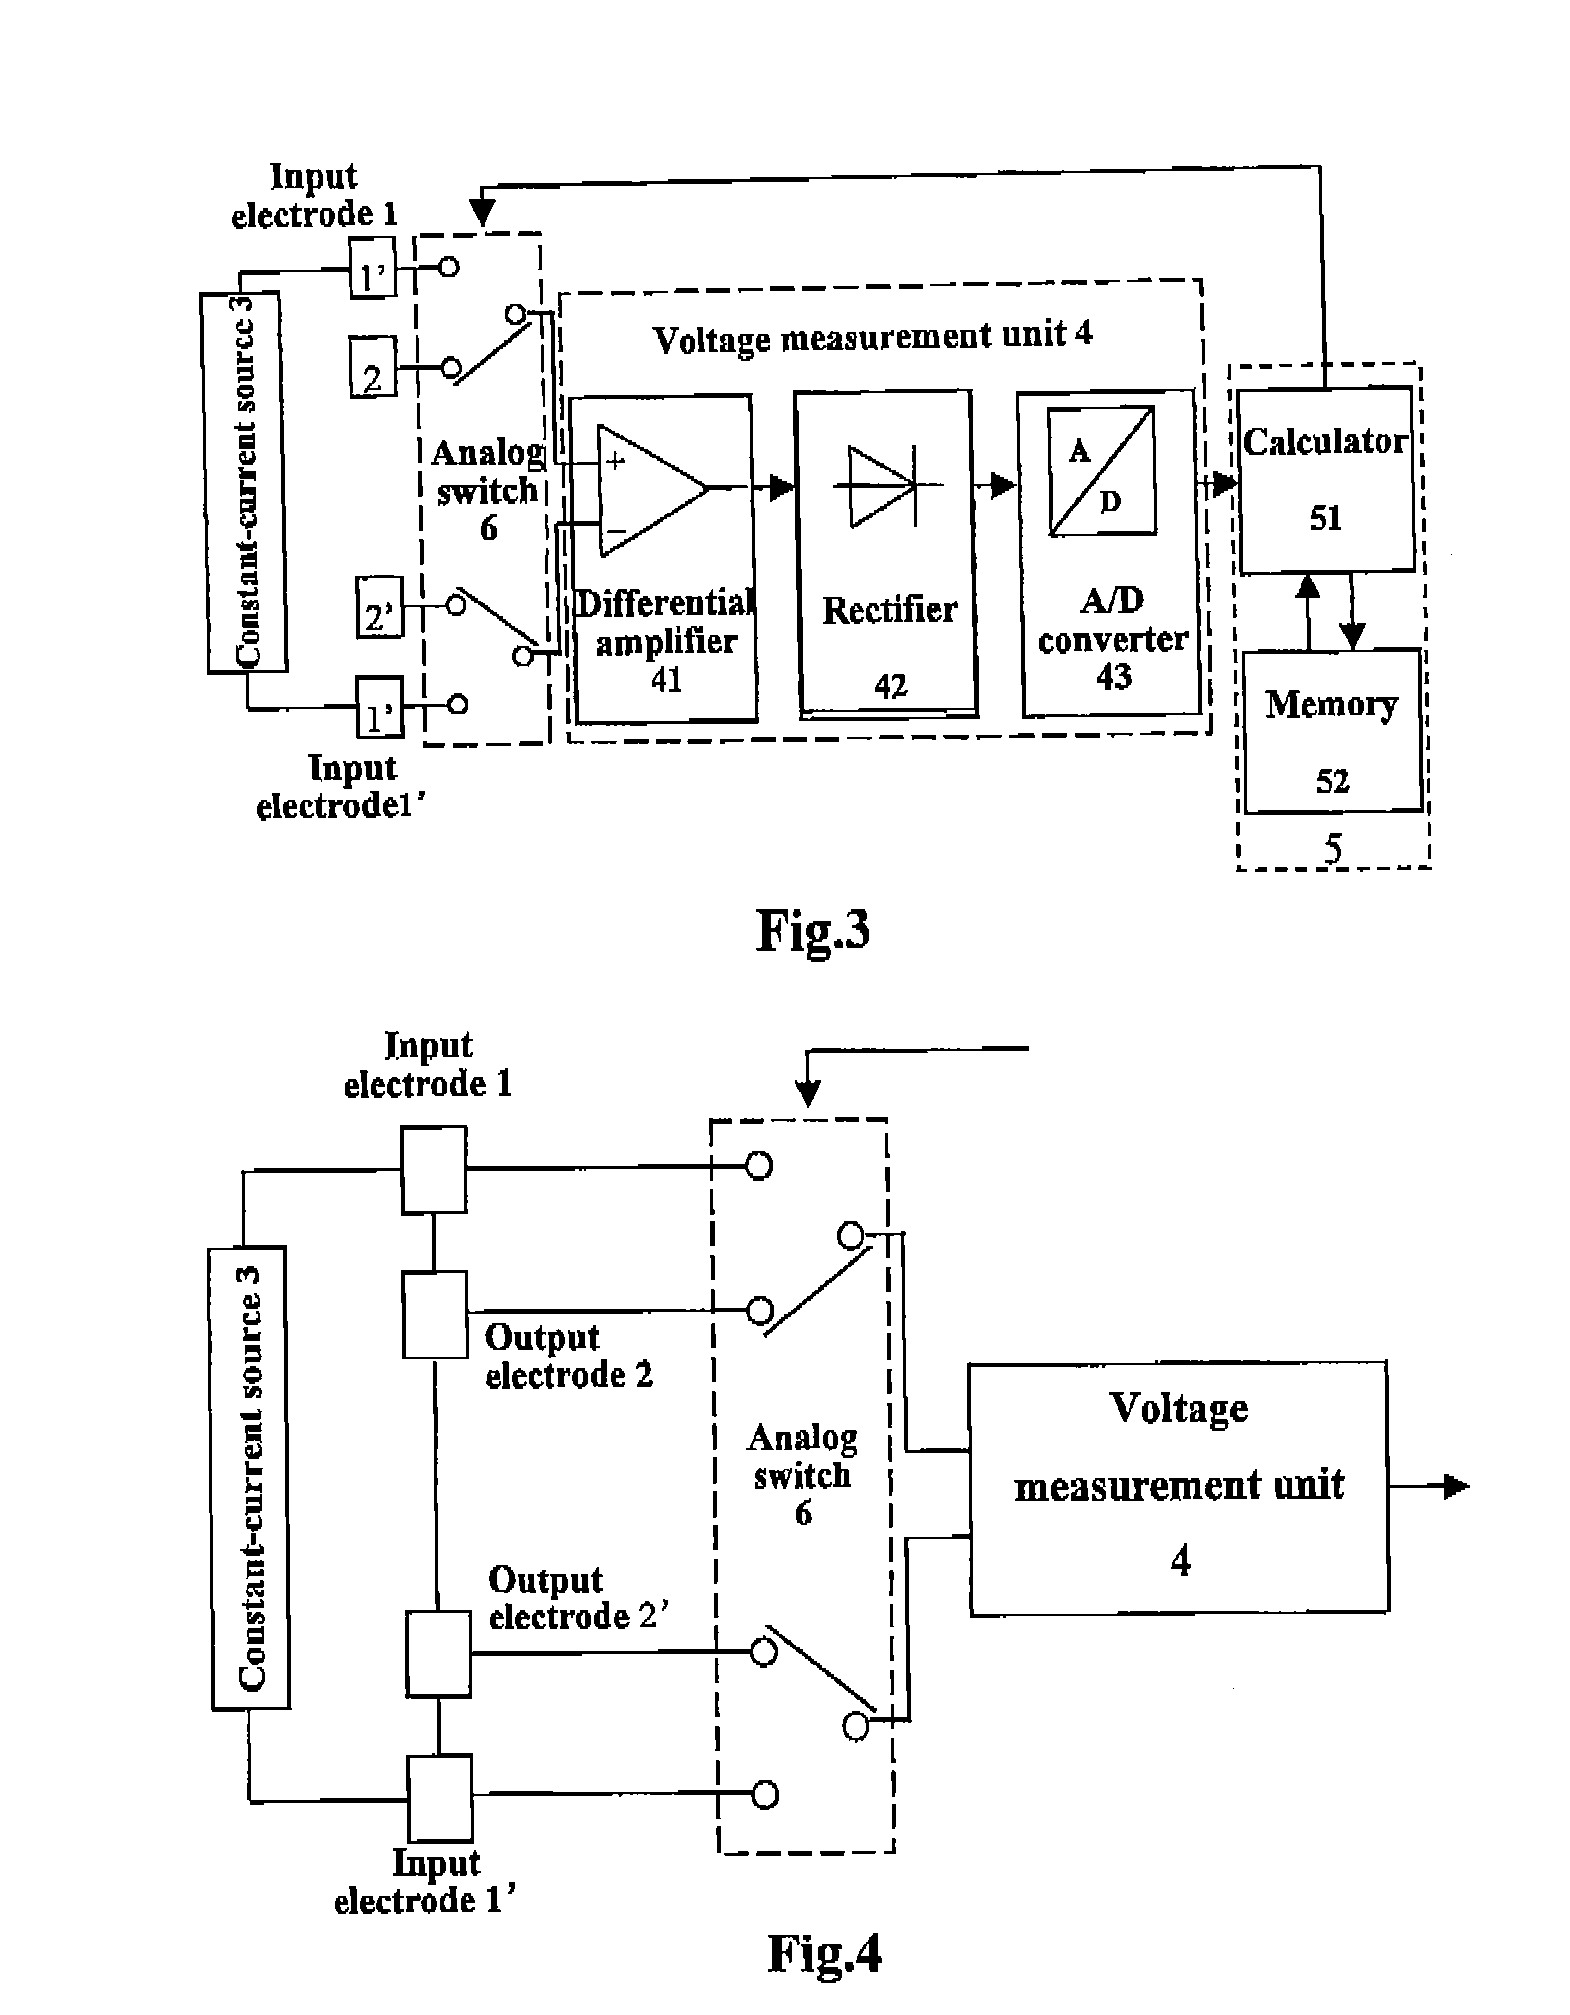 Human body impedance measurement device and its application